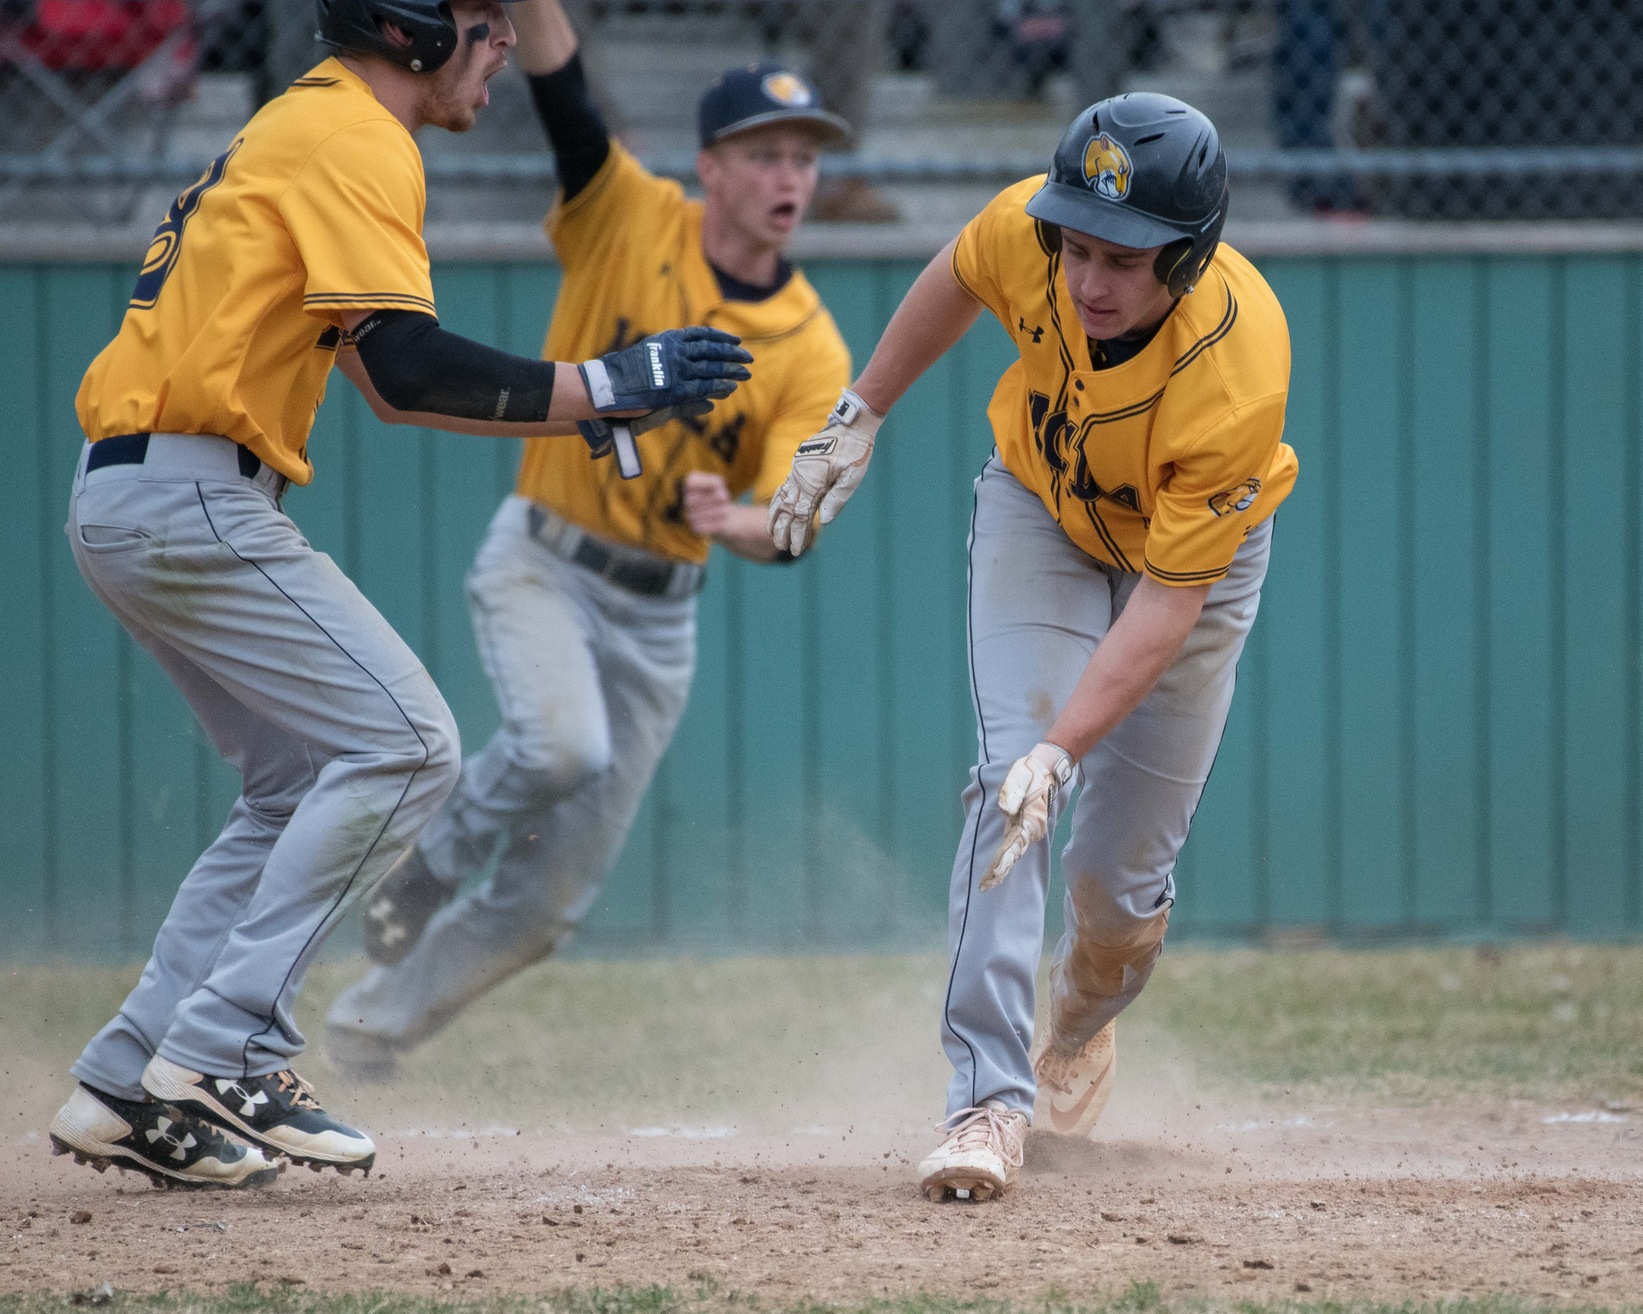 Baseball earns first win of 2020, splits DH with Cobleskill at Baseball Heaven